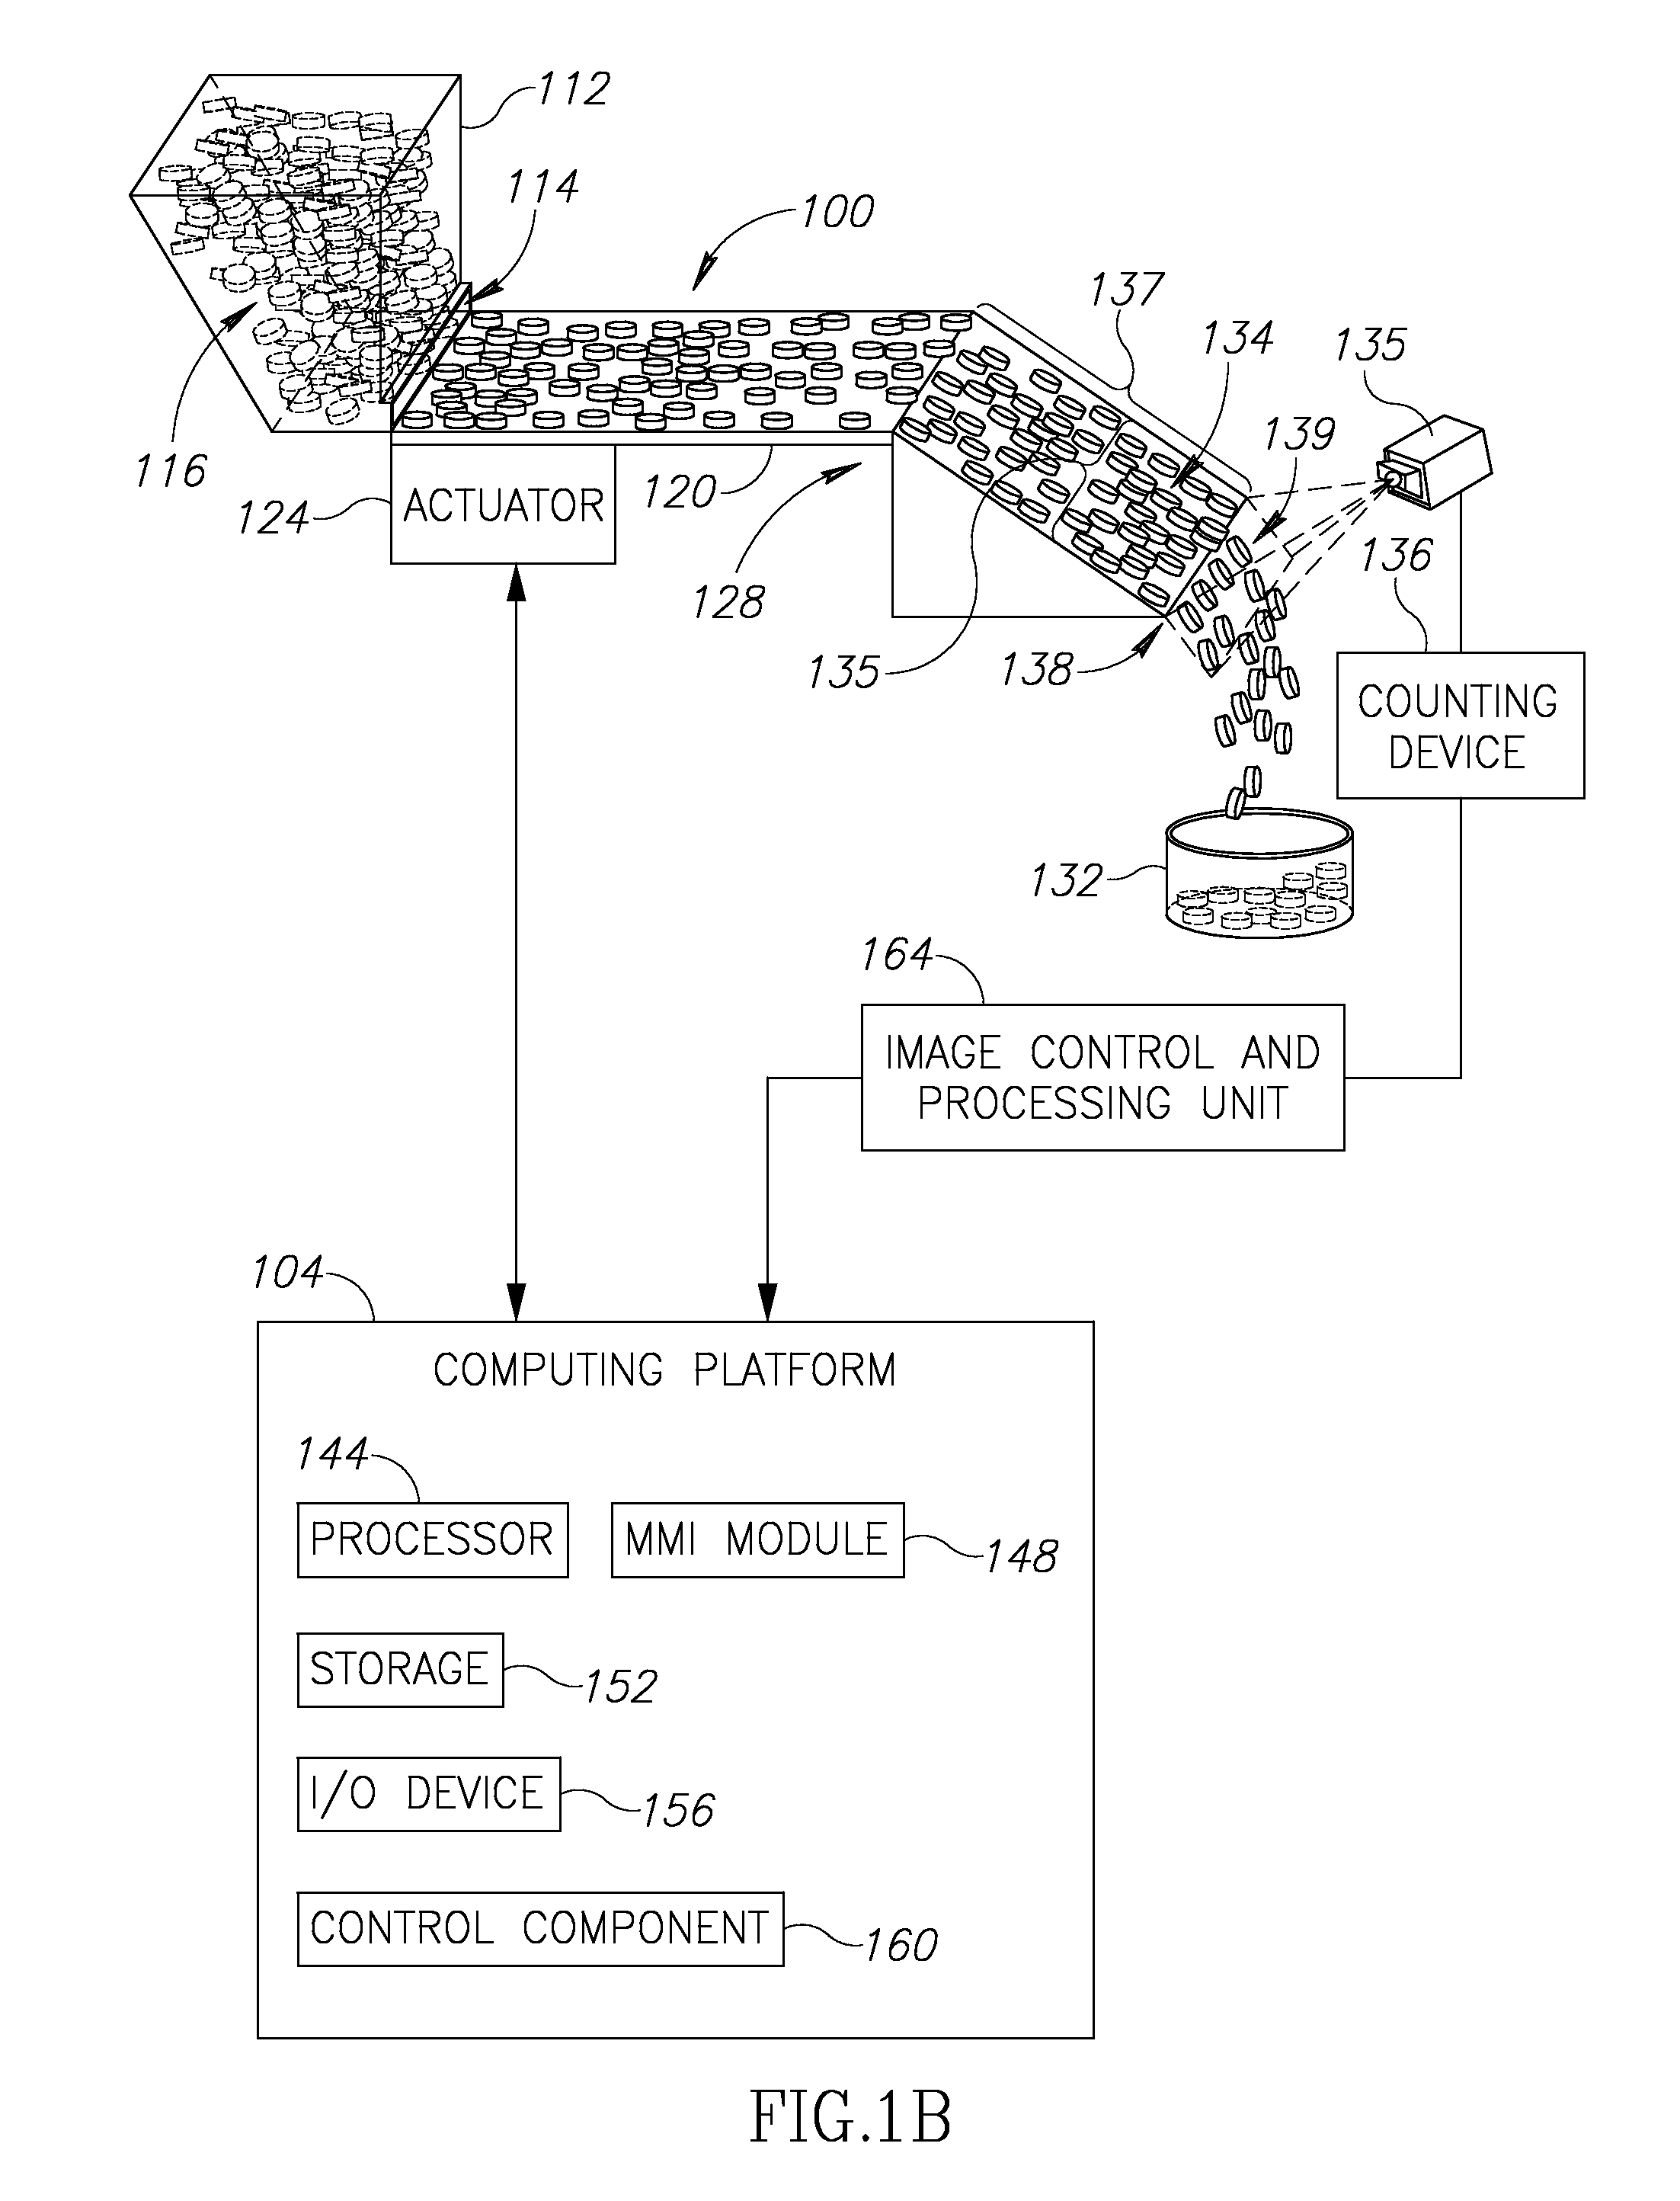 Method and apparatus for dispensing items